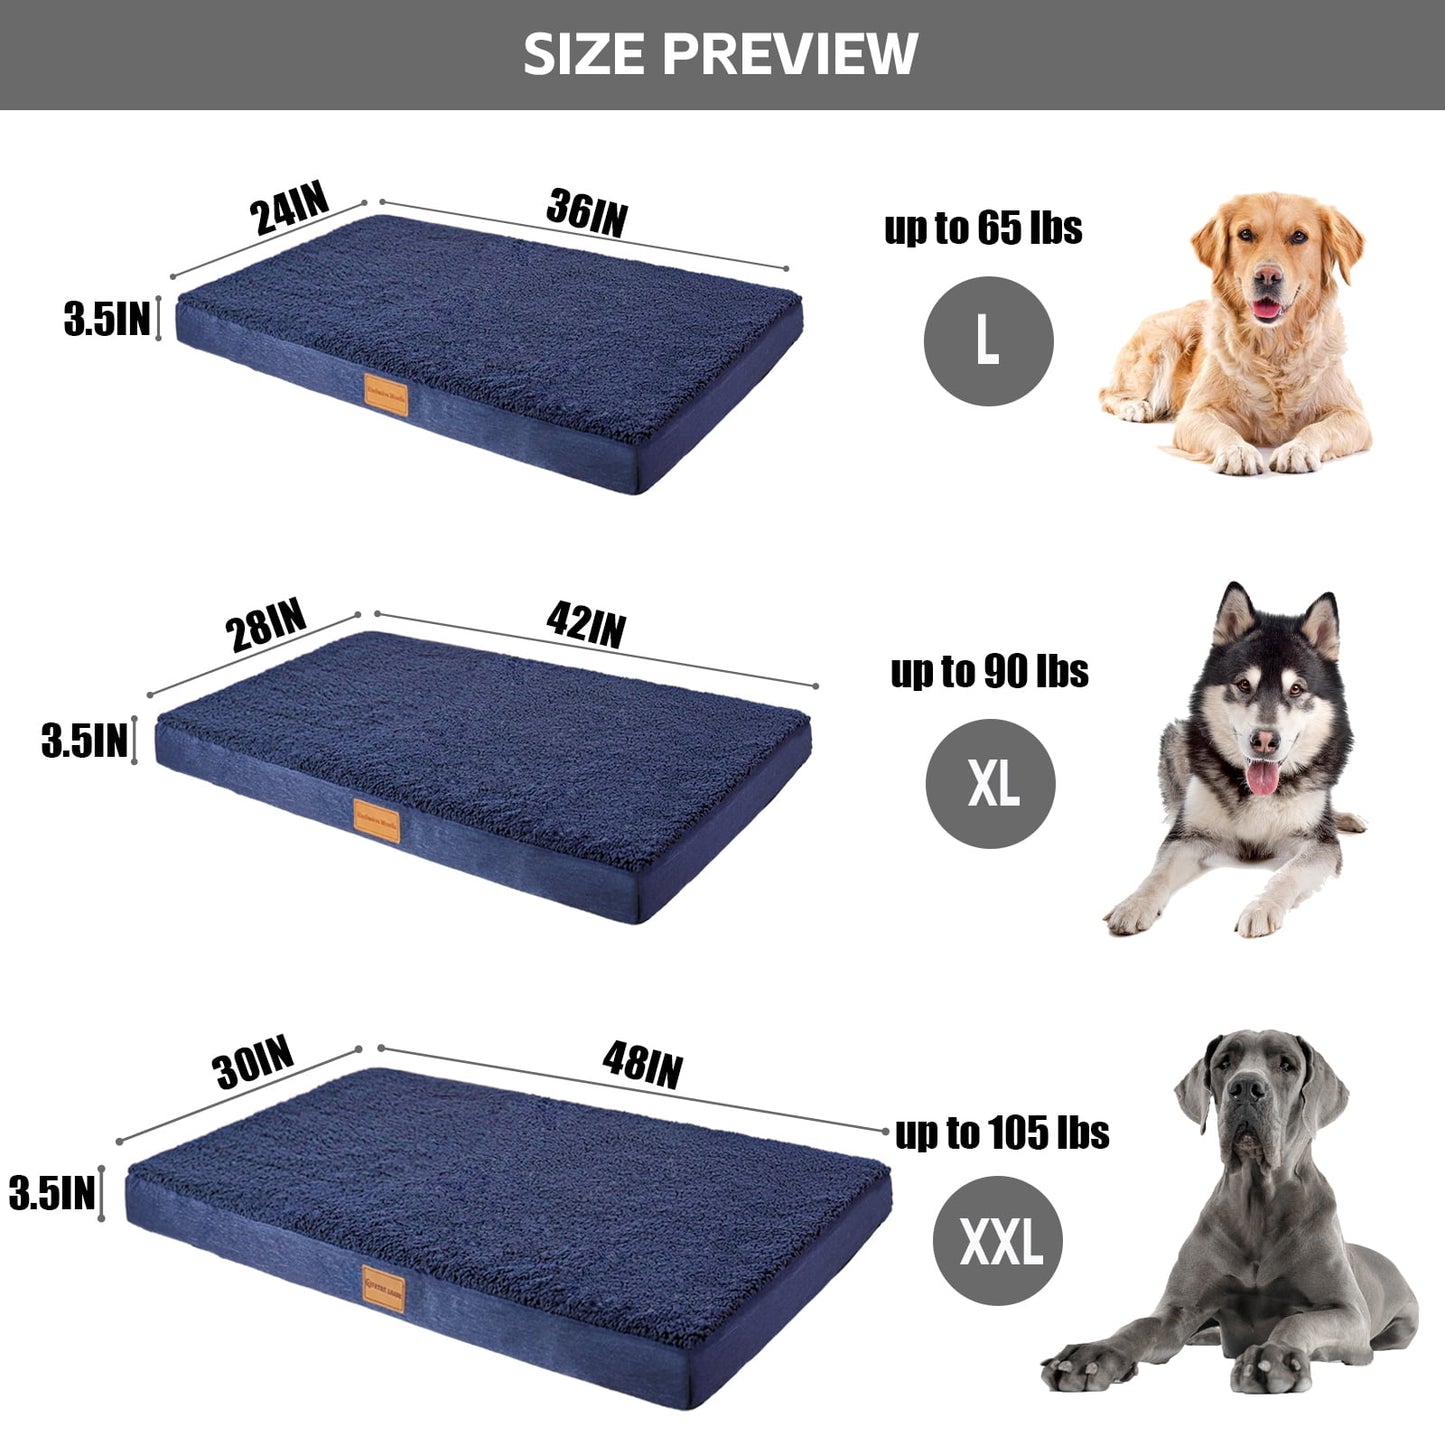 Exclusivo Mezcla Orthopedic XL Dog Bed for Large Dogs 42''X28'', Egg Crate Foam Big Large Dog Beds with Removable Washable Cover,Waterproof Pet Bed Mat, Navy Blue